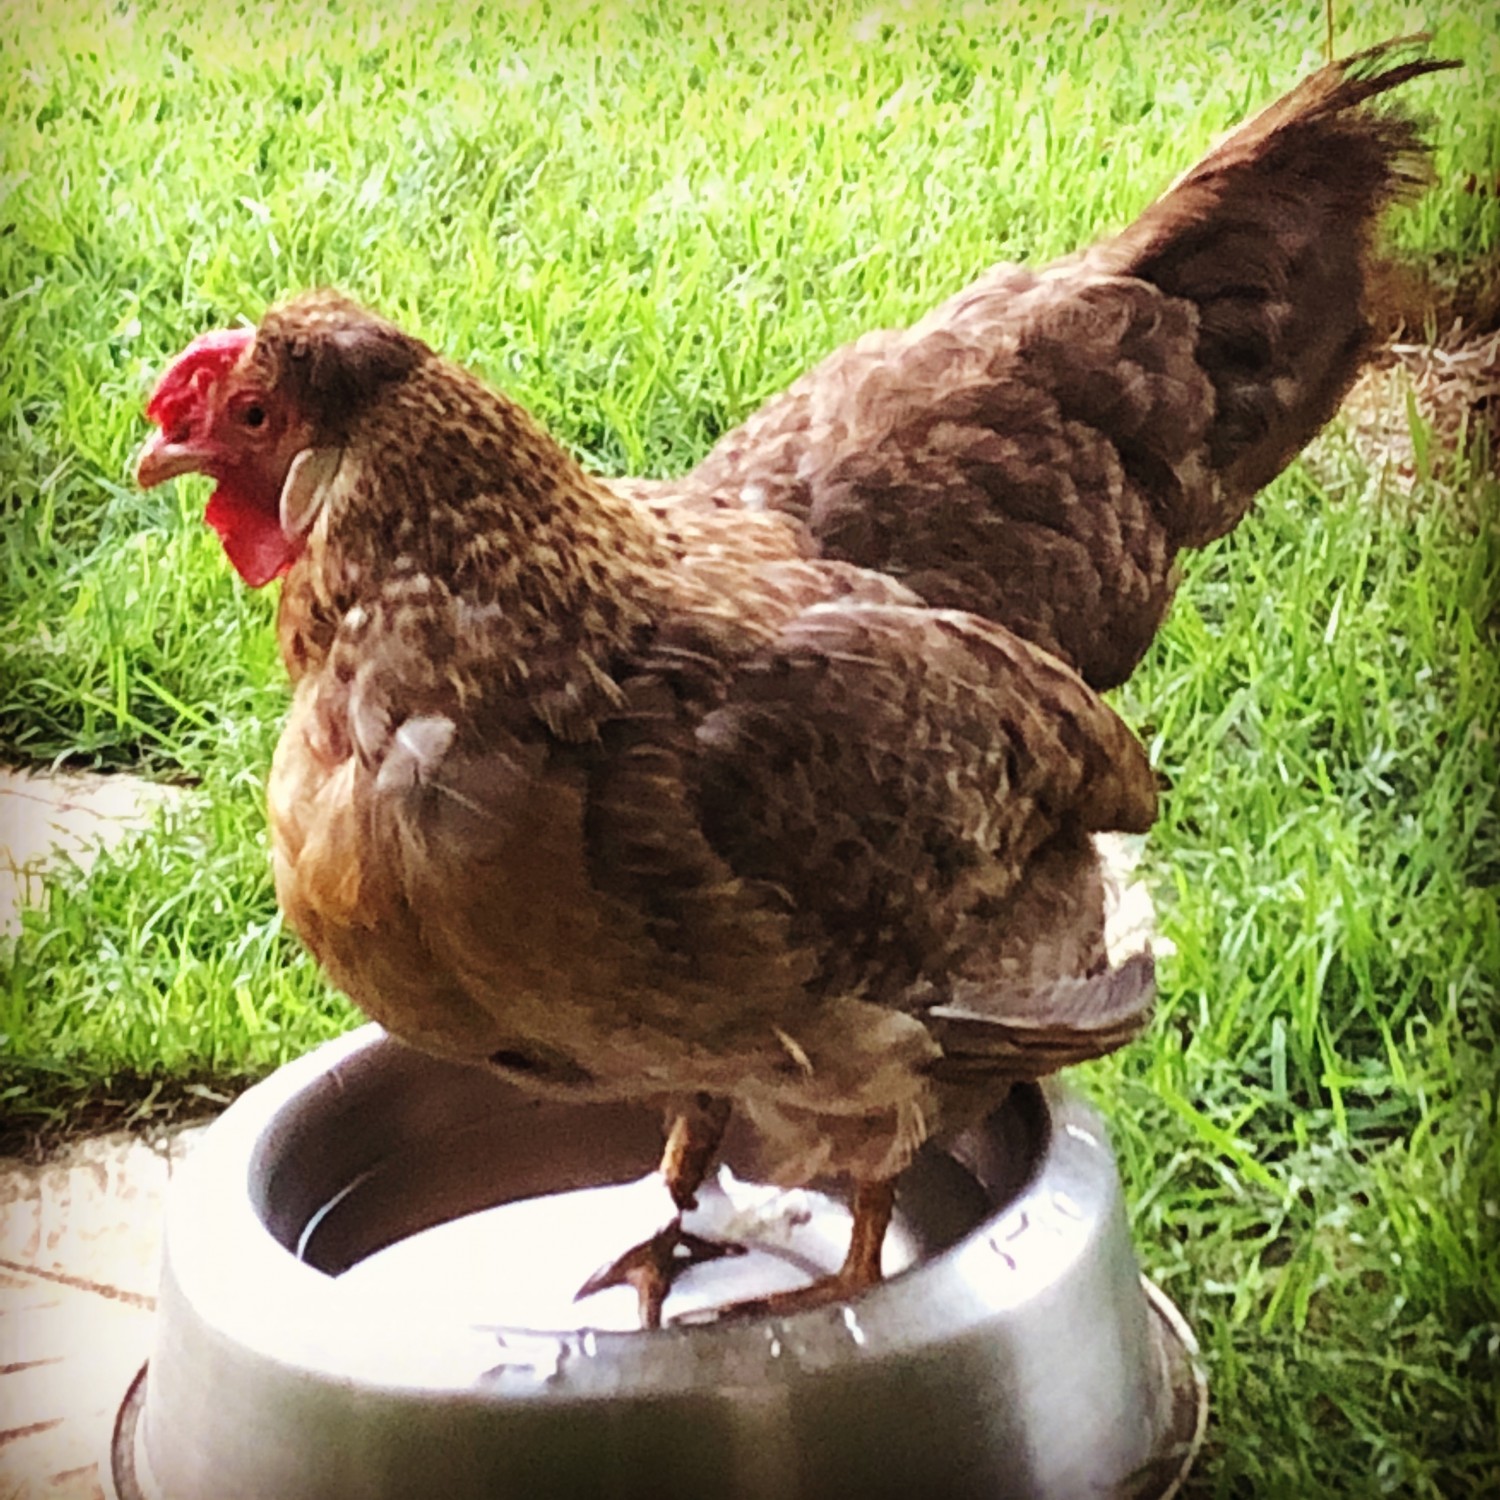 Clack the chicken cooling off in Kailua - Dale Veterinary Mobile Clinic. We provide veterinary care for chickens, ducks, guinea pigs, rabbits, chameleons, tortoises, turtles, dogs, cats, sheep, goats...